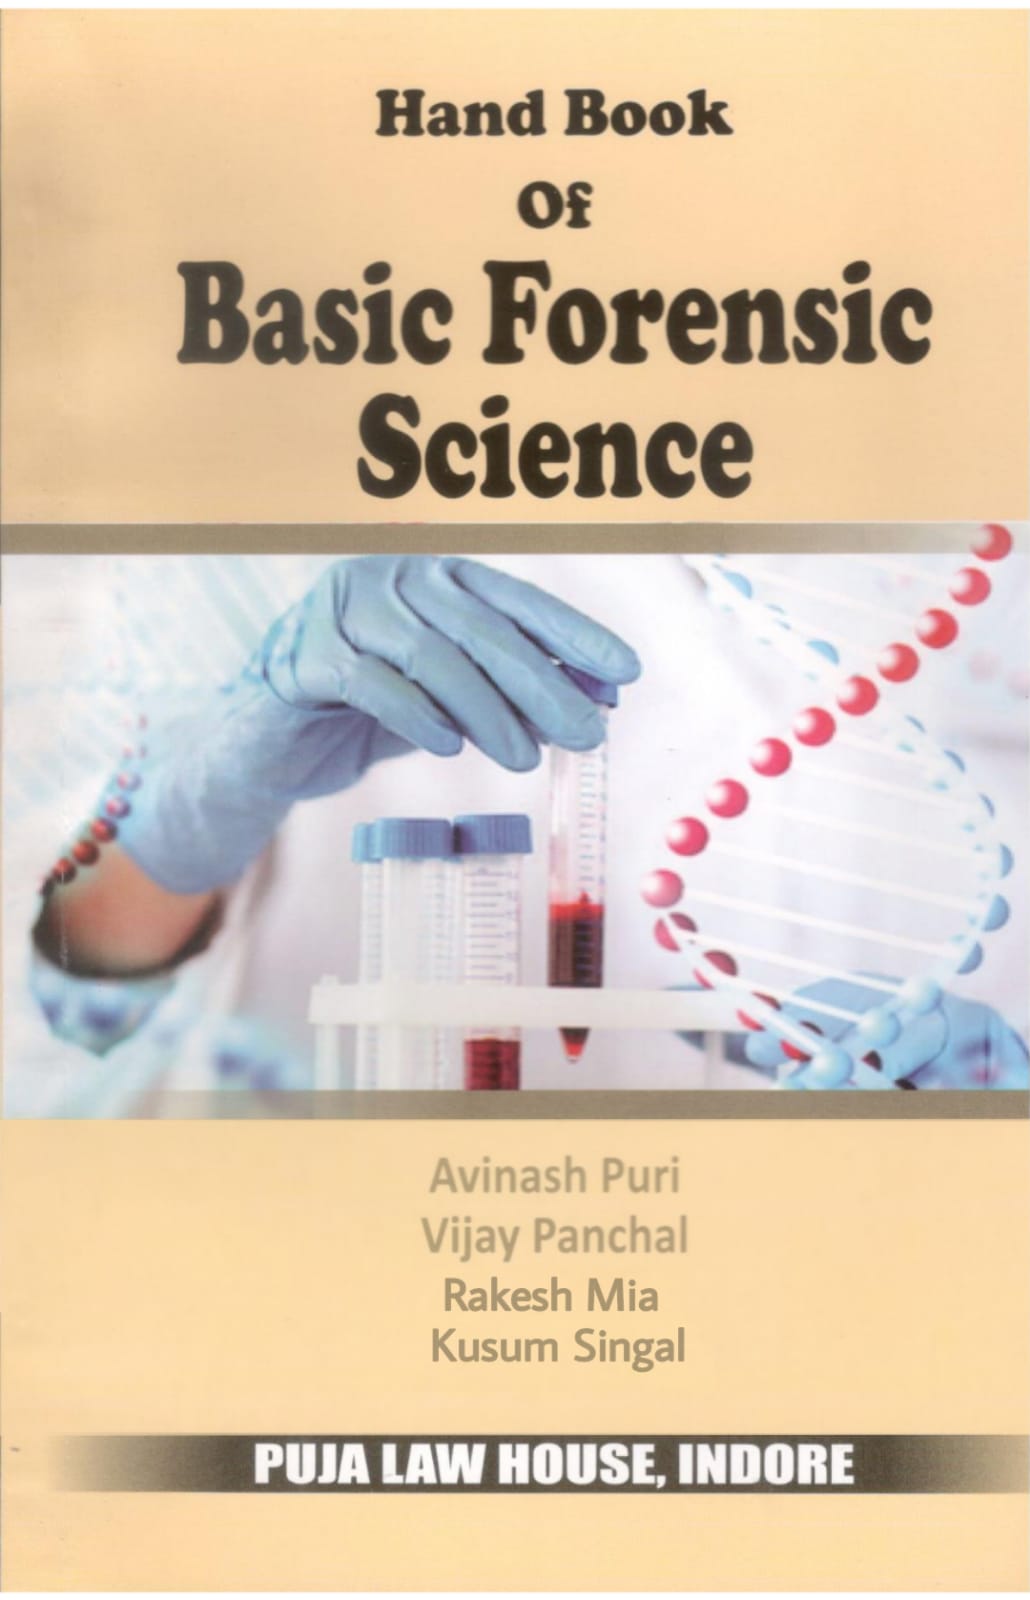 Hand book of Basic Forensic Science